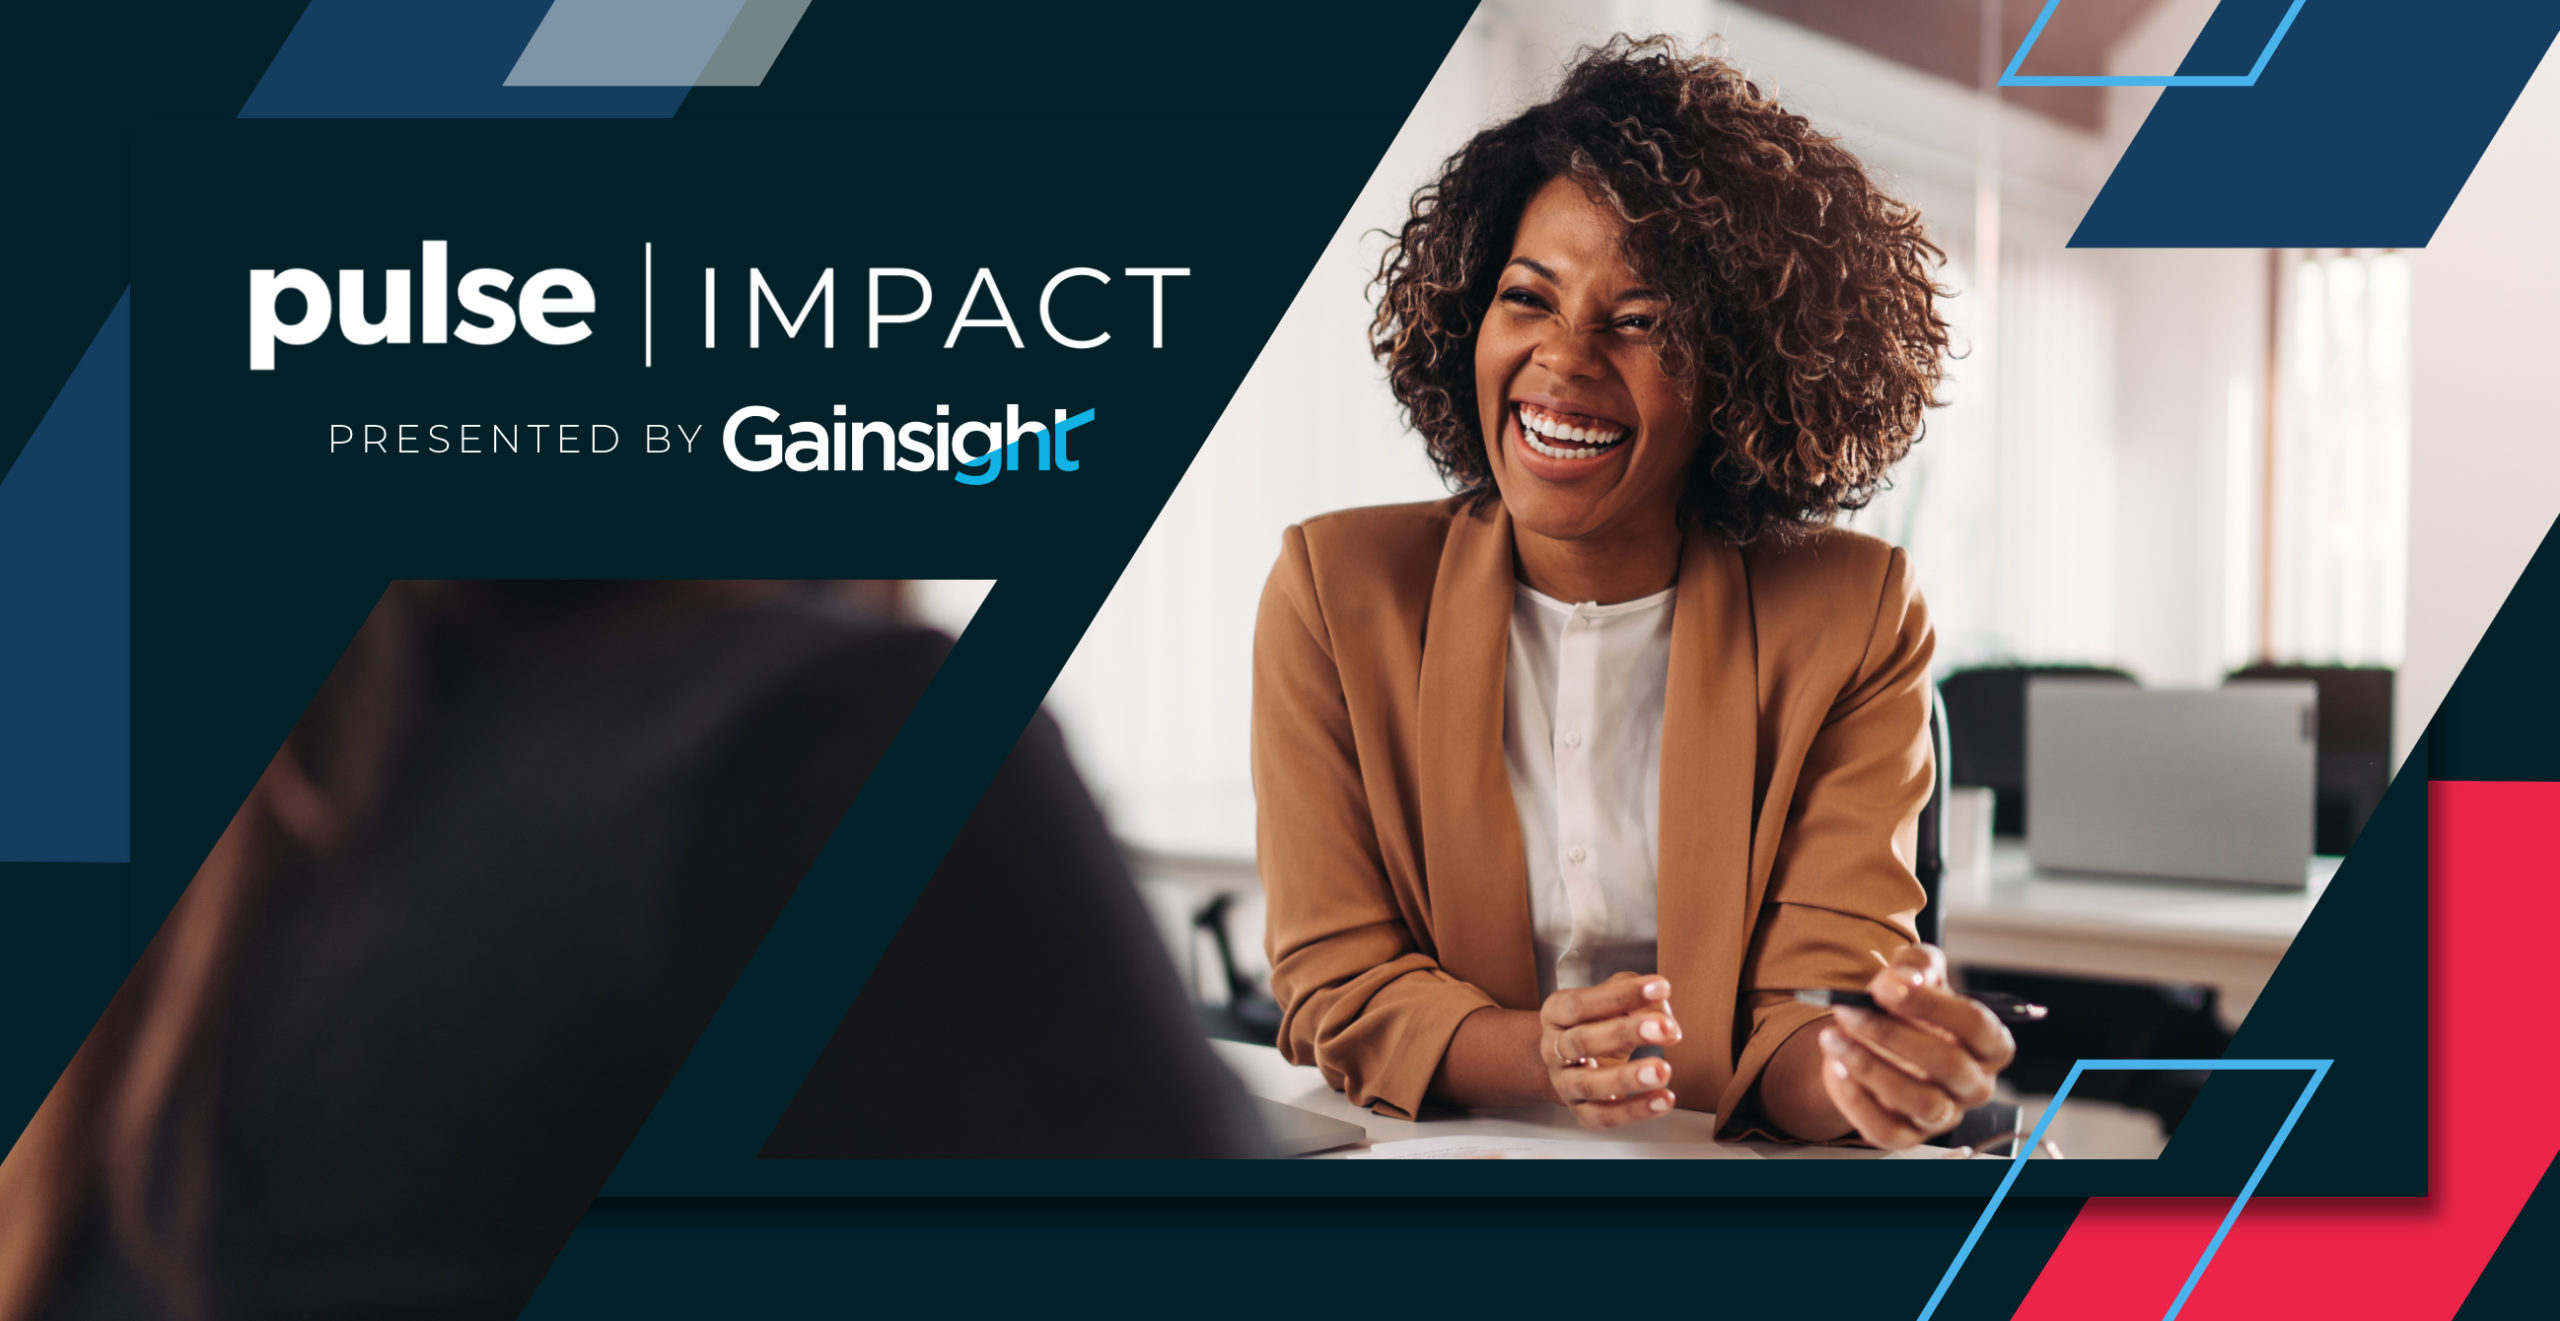 Gainsight Kicks-Off 9th Annual Pulse Conference with Announcement of $2.5M Pulse Impact Fund to Expand Equal Access to Education and Career Opportunities in Customer Success Image